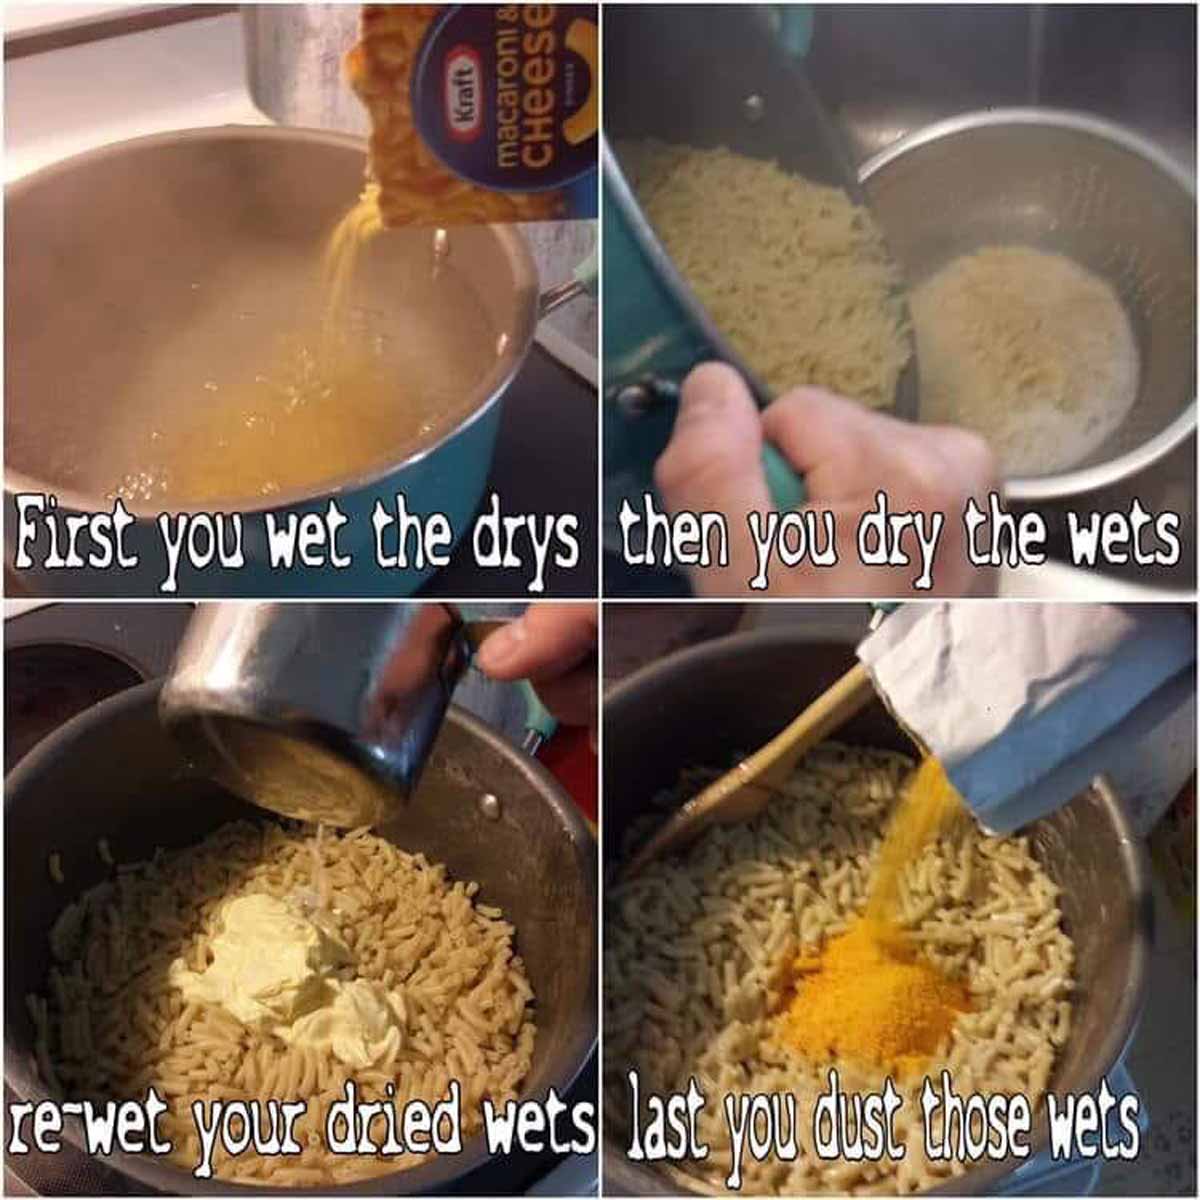 Funny Macaroni and Cheese instructions image that says 'first your wet the drys, then you dry the wets, re-wet your dried wets, last you dust those wets'